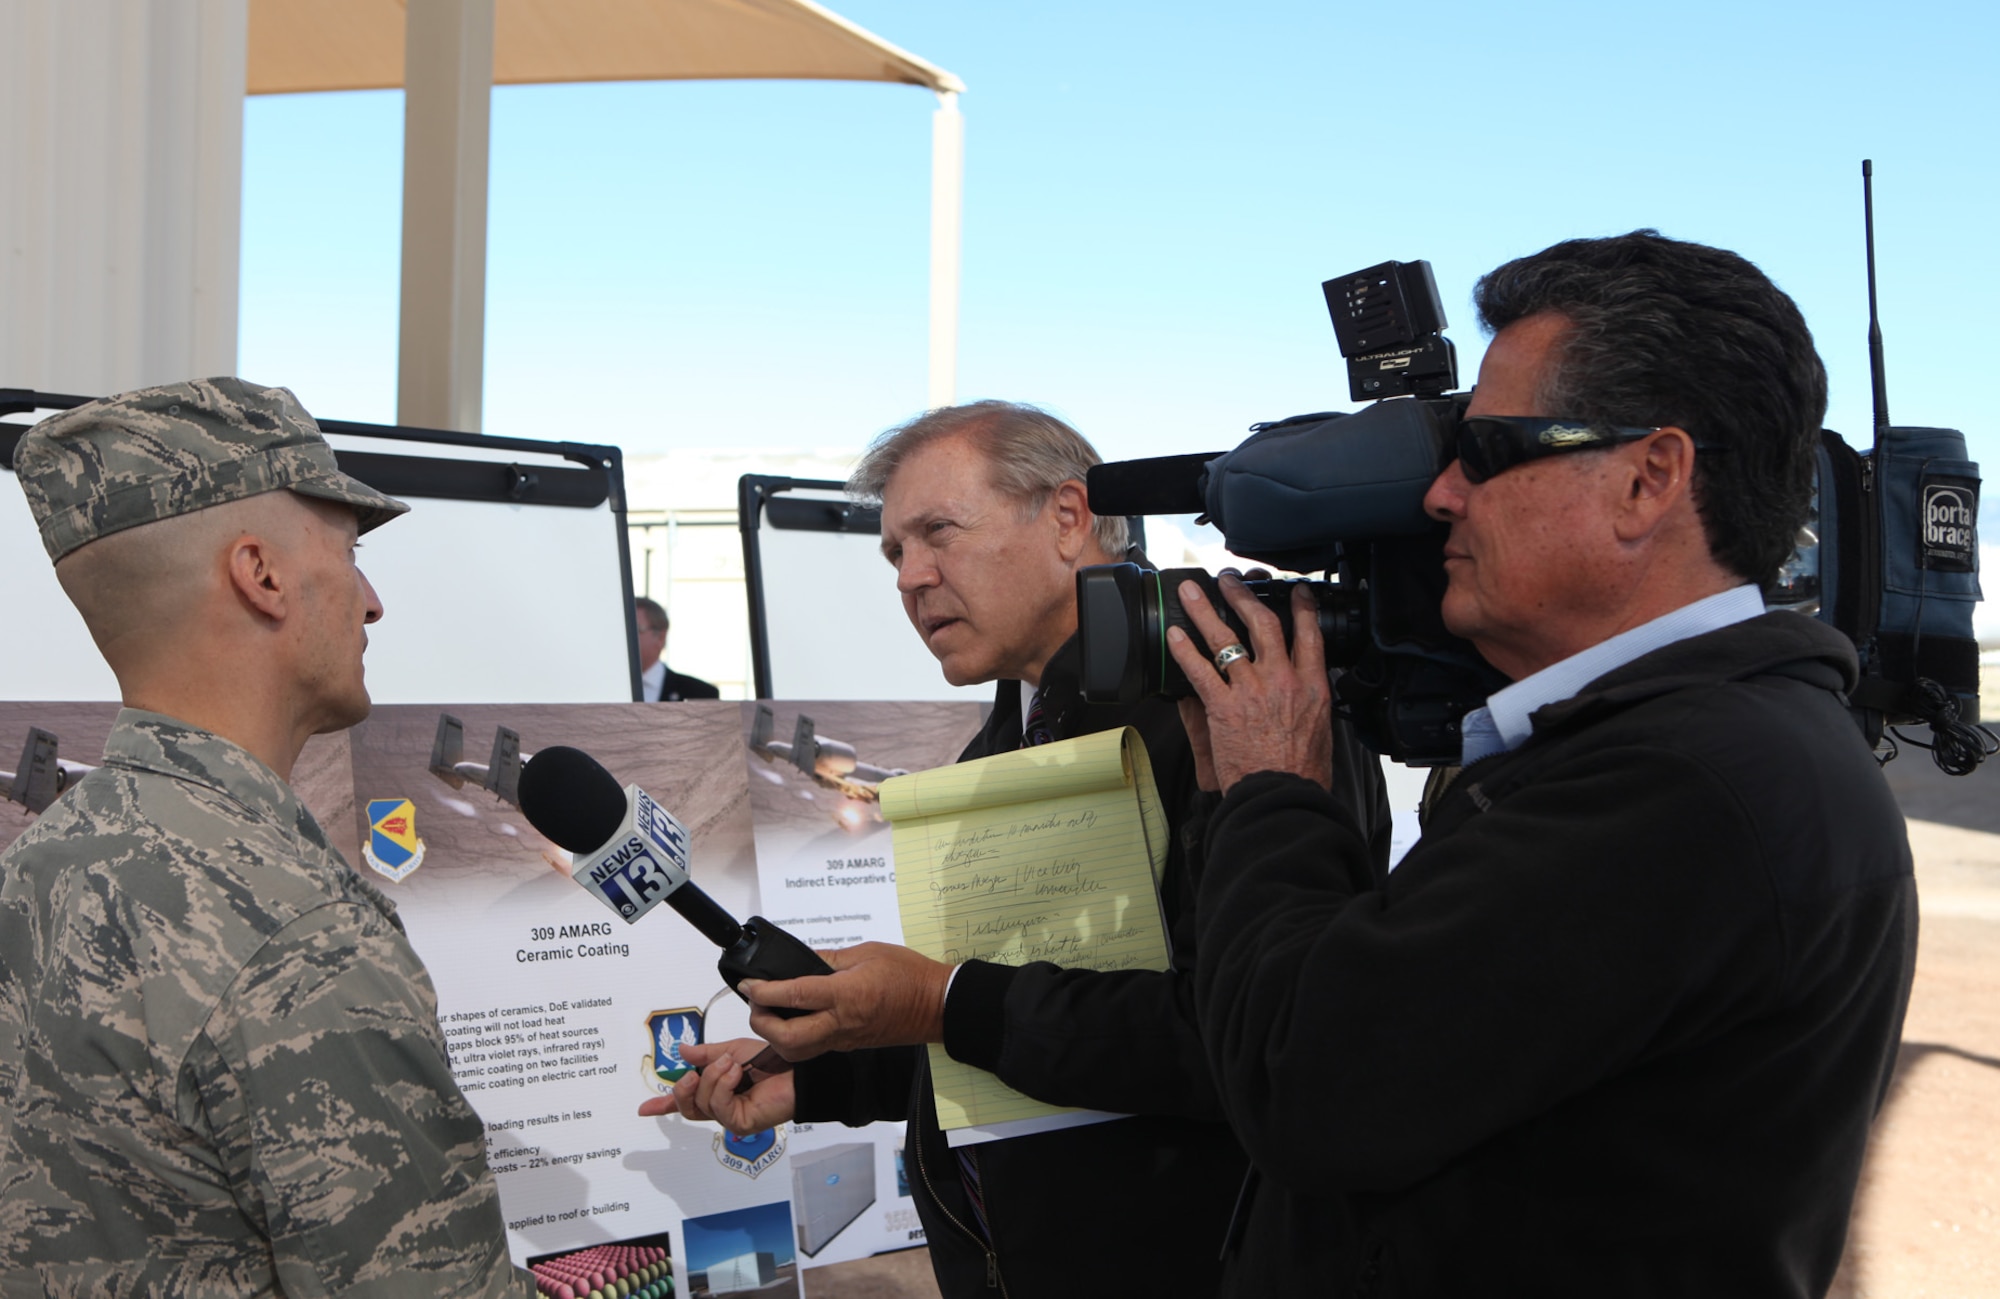 A military member from the 309th Aerospace Maintenance and Regeneration Group speaks to media during the visit of White House energy officials to Davis-Monthan Air Force Base, Ariz., Feb. 3, 2012. White House officials, along with the Tucson mayor, were briefed on the base’s clean energy projects. (Courtesy photo)